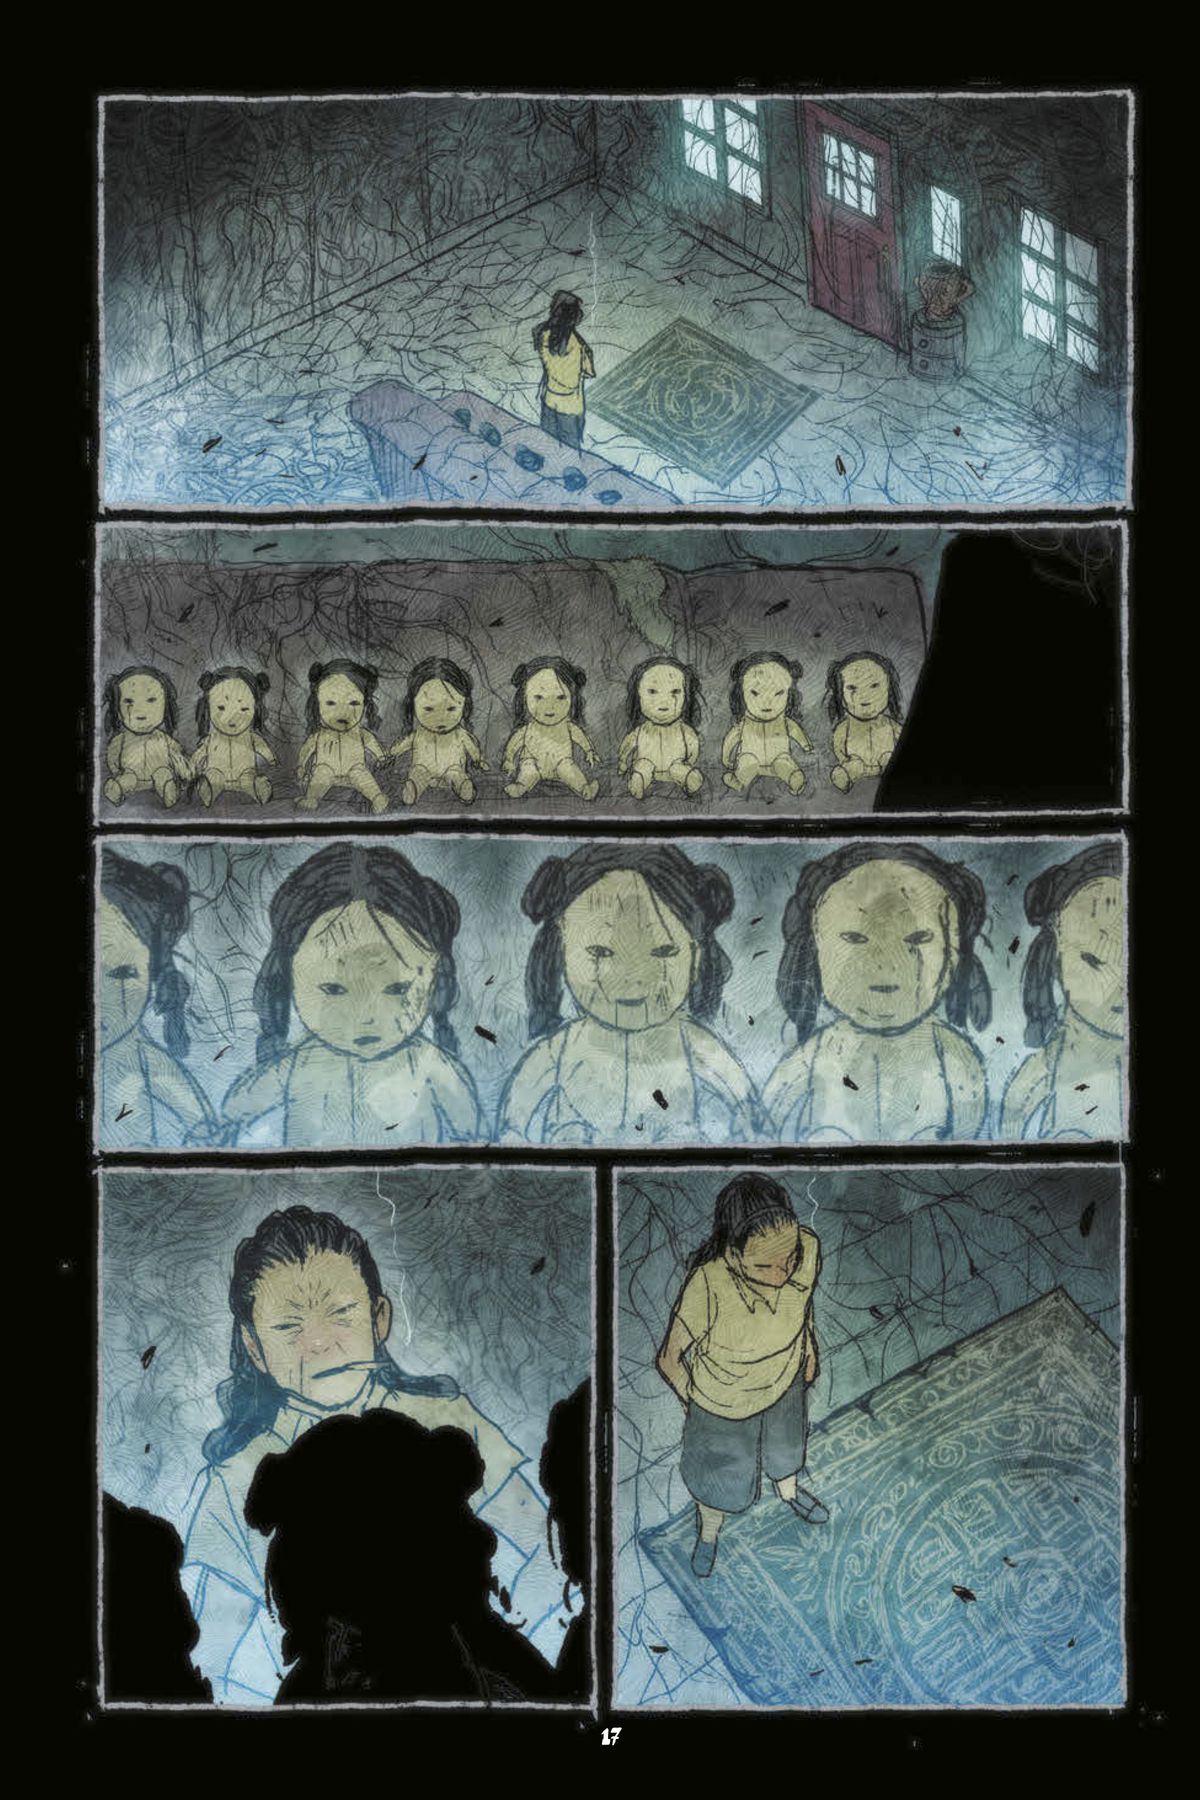 In a page from Abrams ComicArts’ graphic novel Night Eaters, protagonist Ipo Ting stands in an abandoned house with vines growing over all the floors and walls, then turns to glower at a row of naked baby dolls with black hair and Asian facial features, all lined up on a ripped, tattered couch in the middle of the room